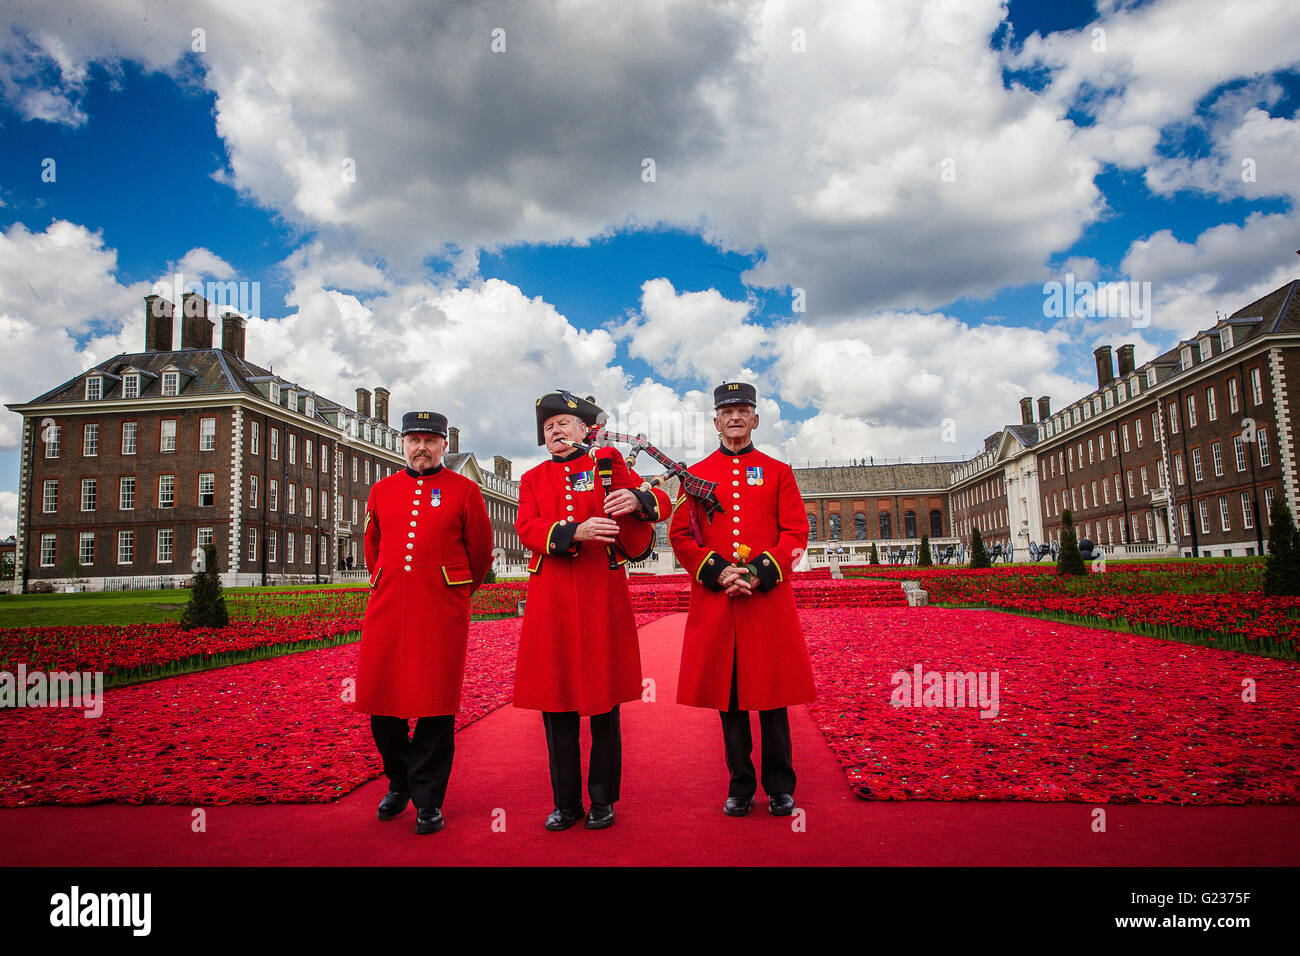 London, UK. 23rd May, 2016. Chelsea Pensioners walk down the Carpet of Hand Crocheted Poppies in front of the the Royal Hospital a display put on as part of the 2016 Chelsea Flower Show Credit:  David Betteridge/Alamy Live News Stock Photo